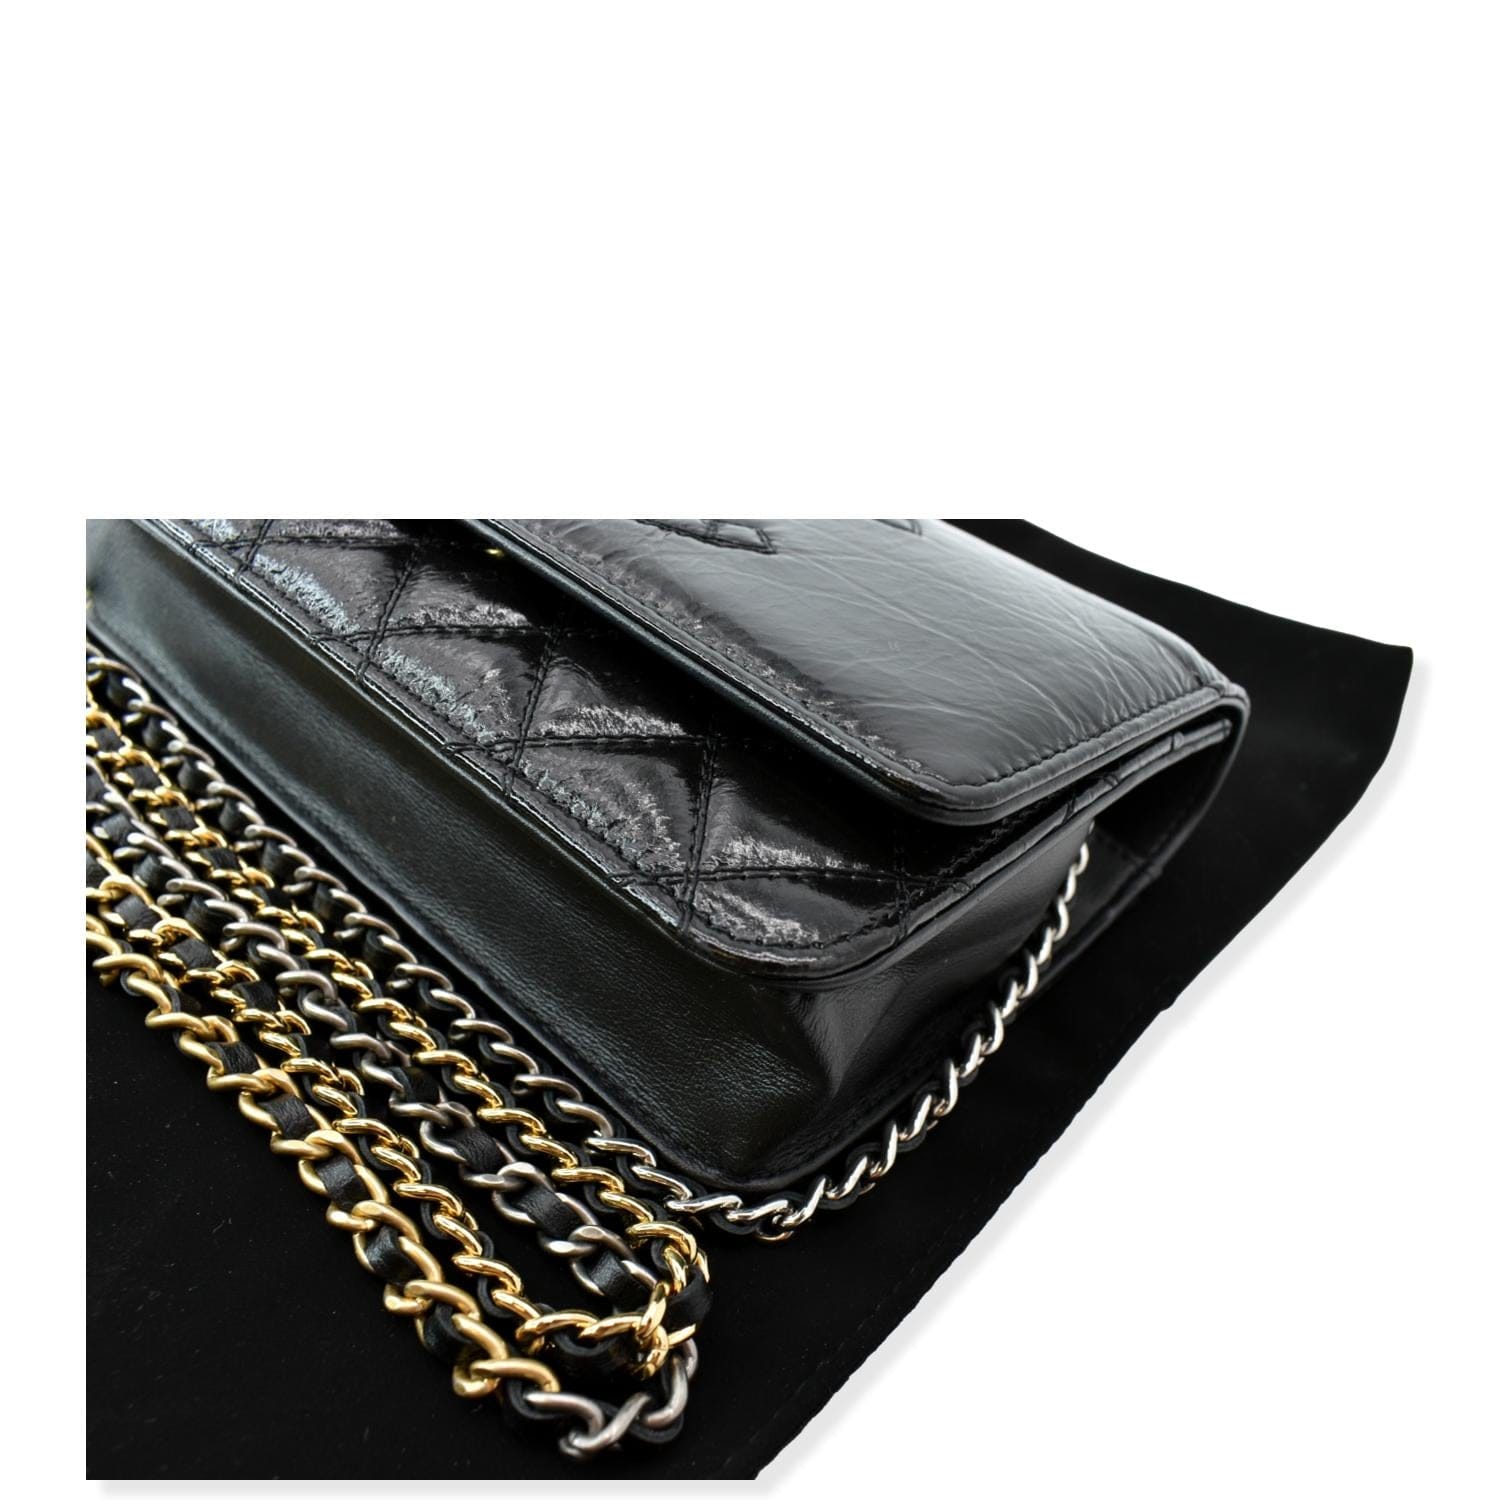 Chanel Wallet On Chain Timeless/Classique patent leather crossbody